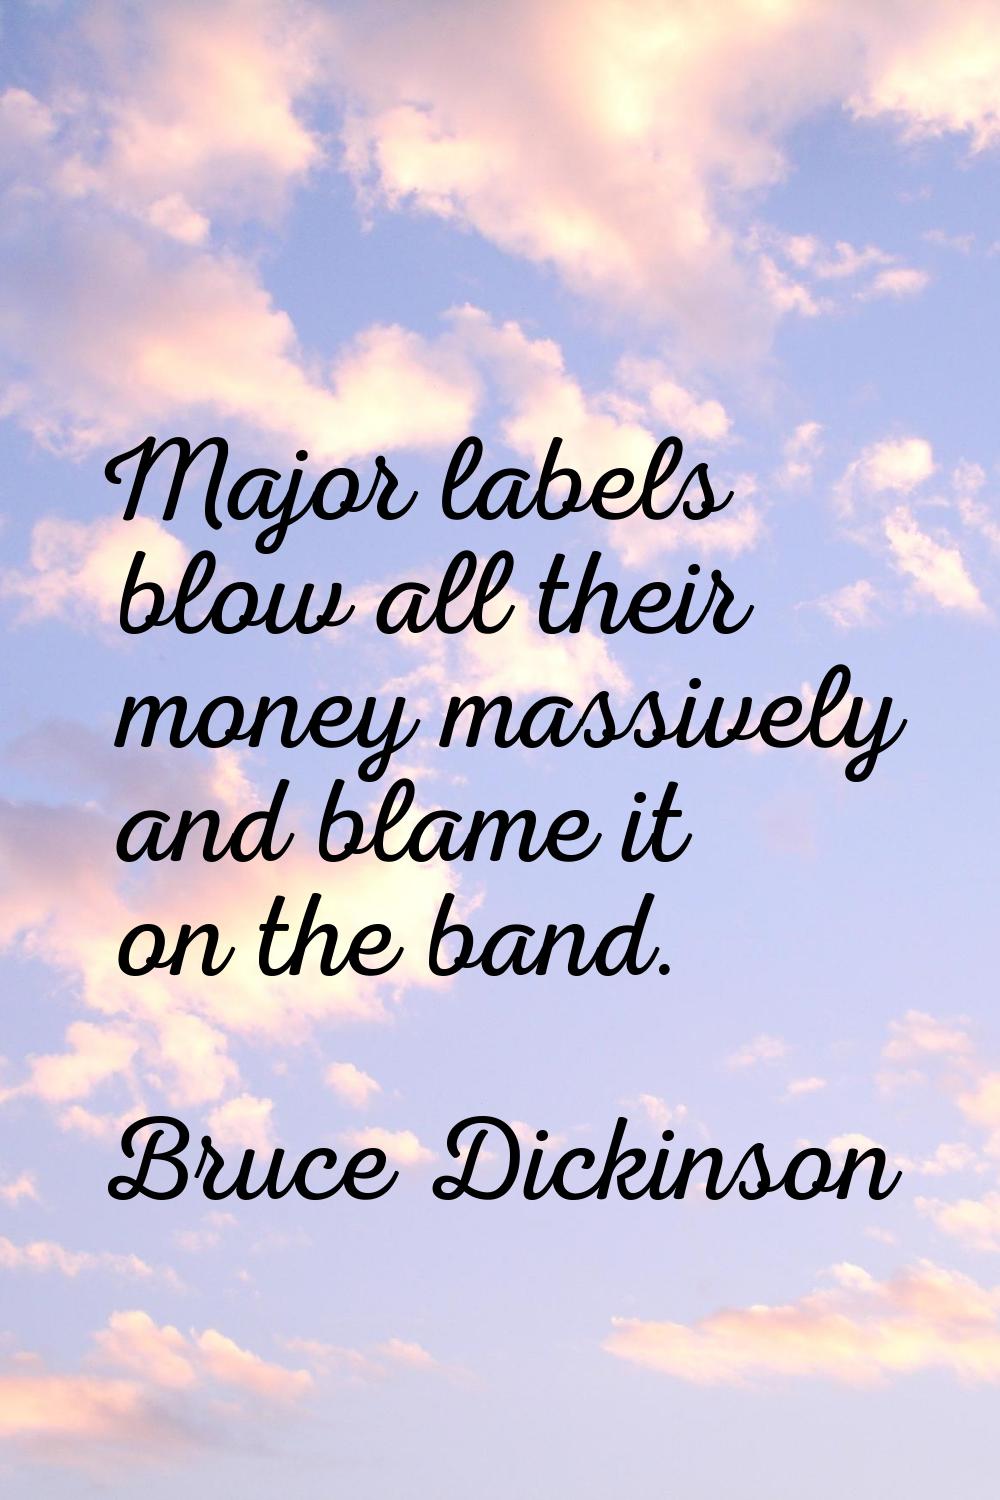 Major labels blow all their money massively and blame it on the band.